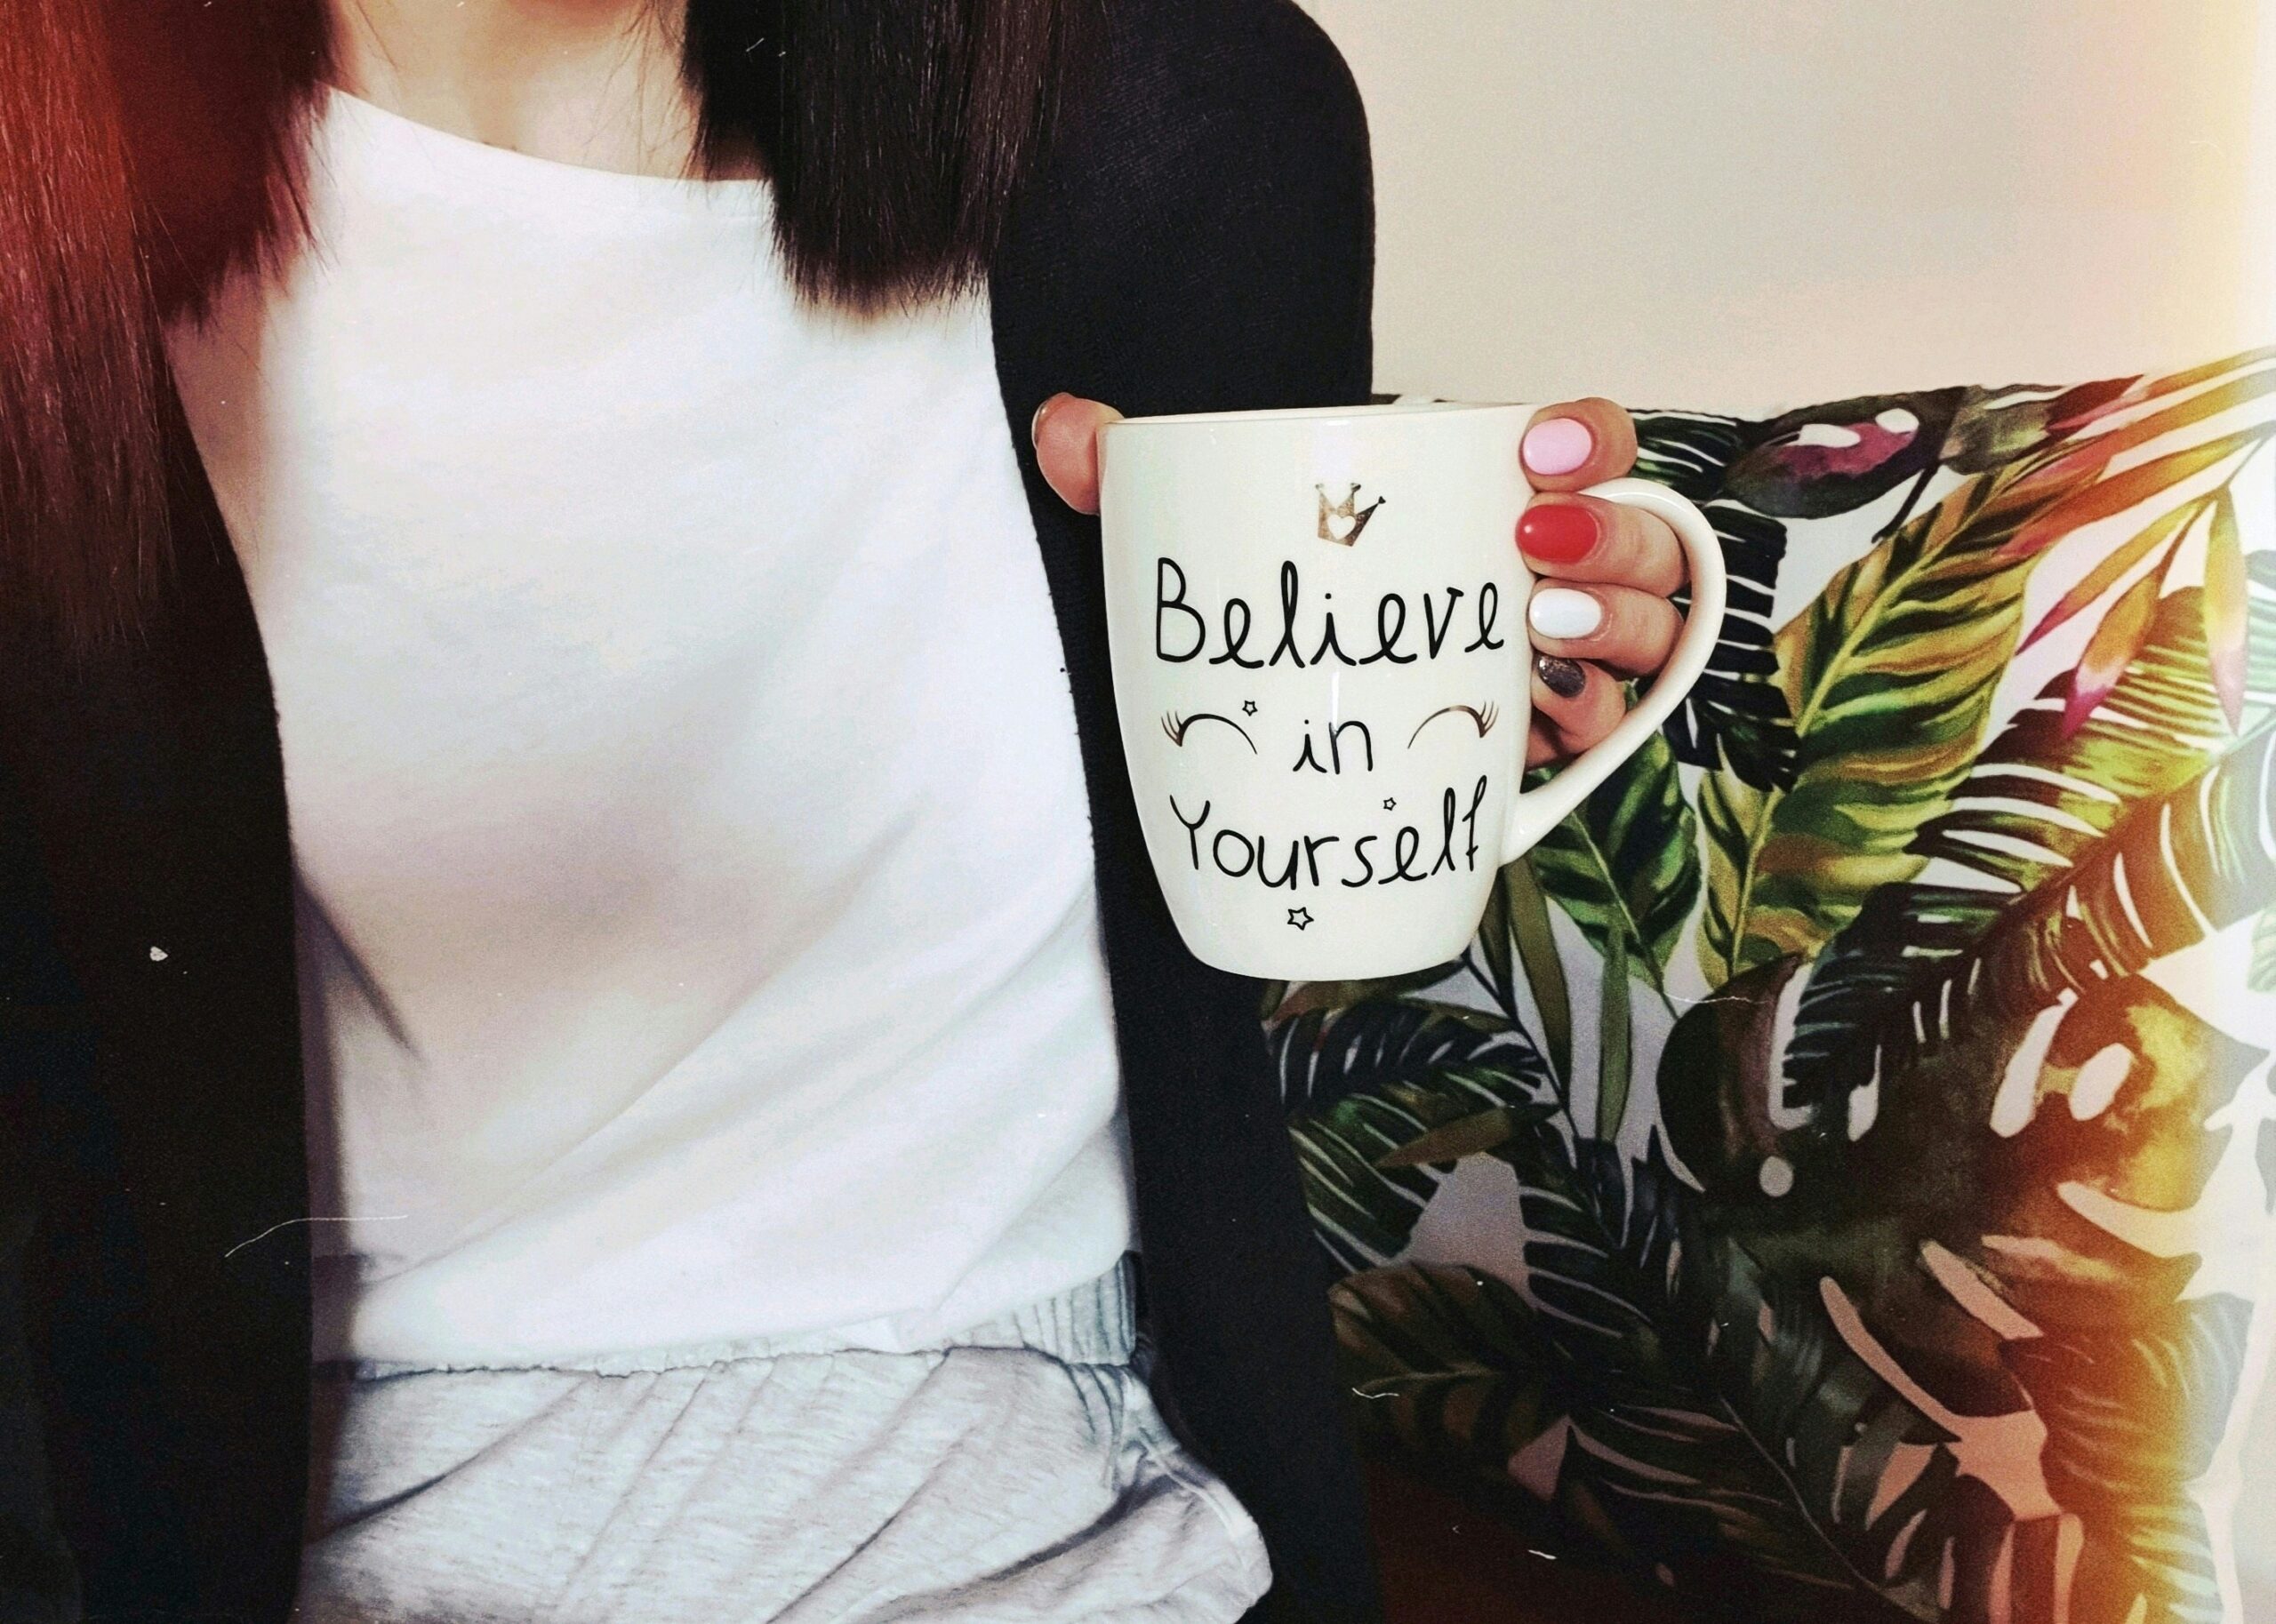 woman wearing black cardigan holding mug that says 'believe in yourself'